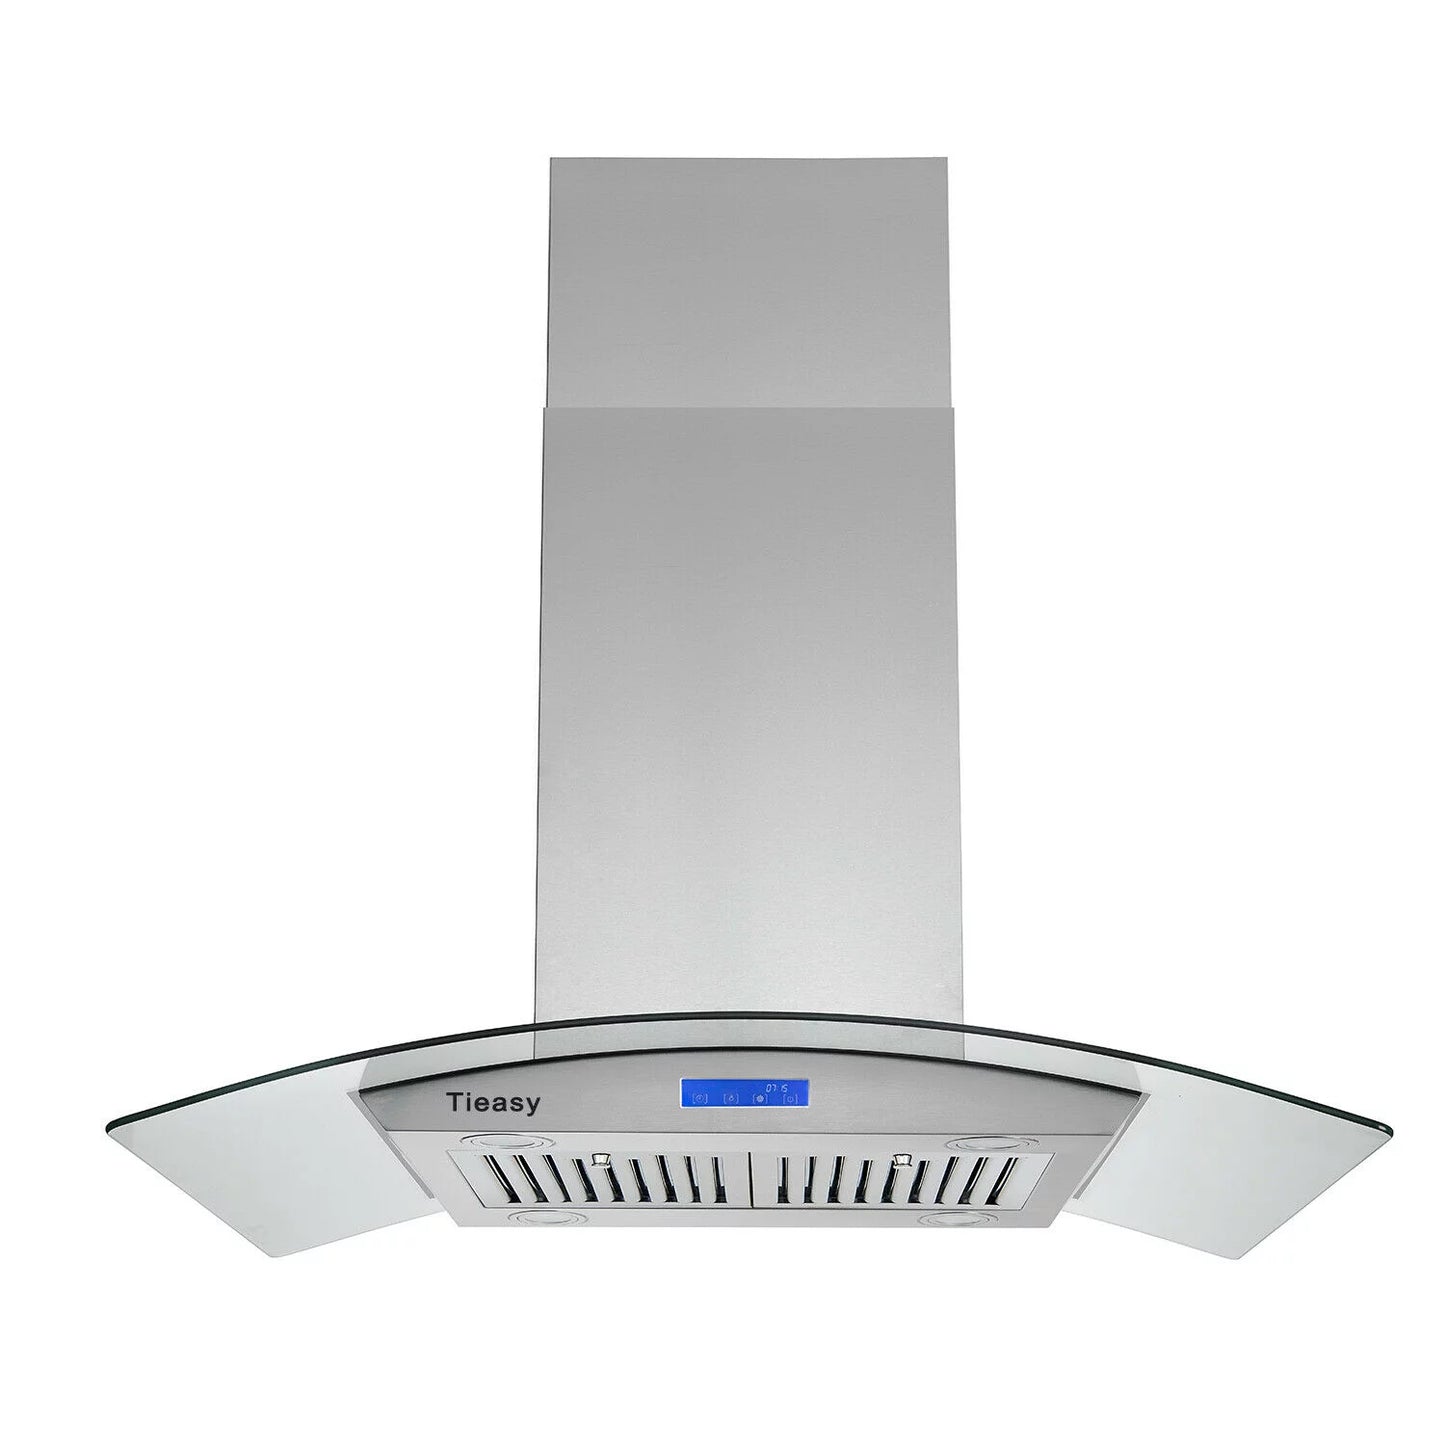 Tieasy 36 inch Island Mount Range Hood 900 CFM with Glass LCD Touch Control 4 LED Lamps